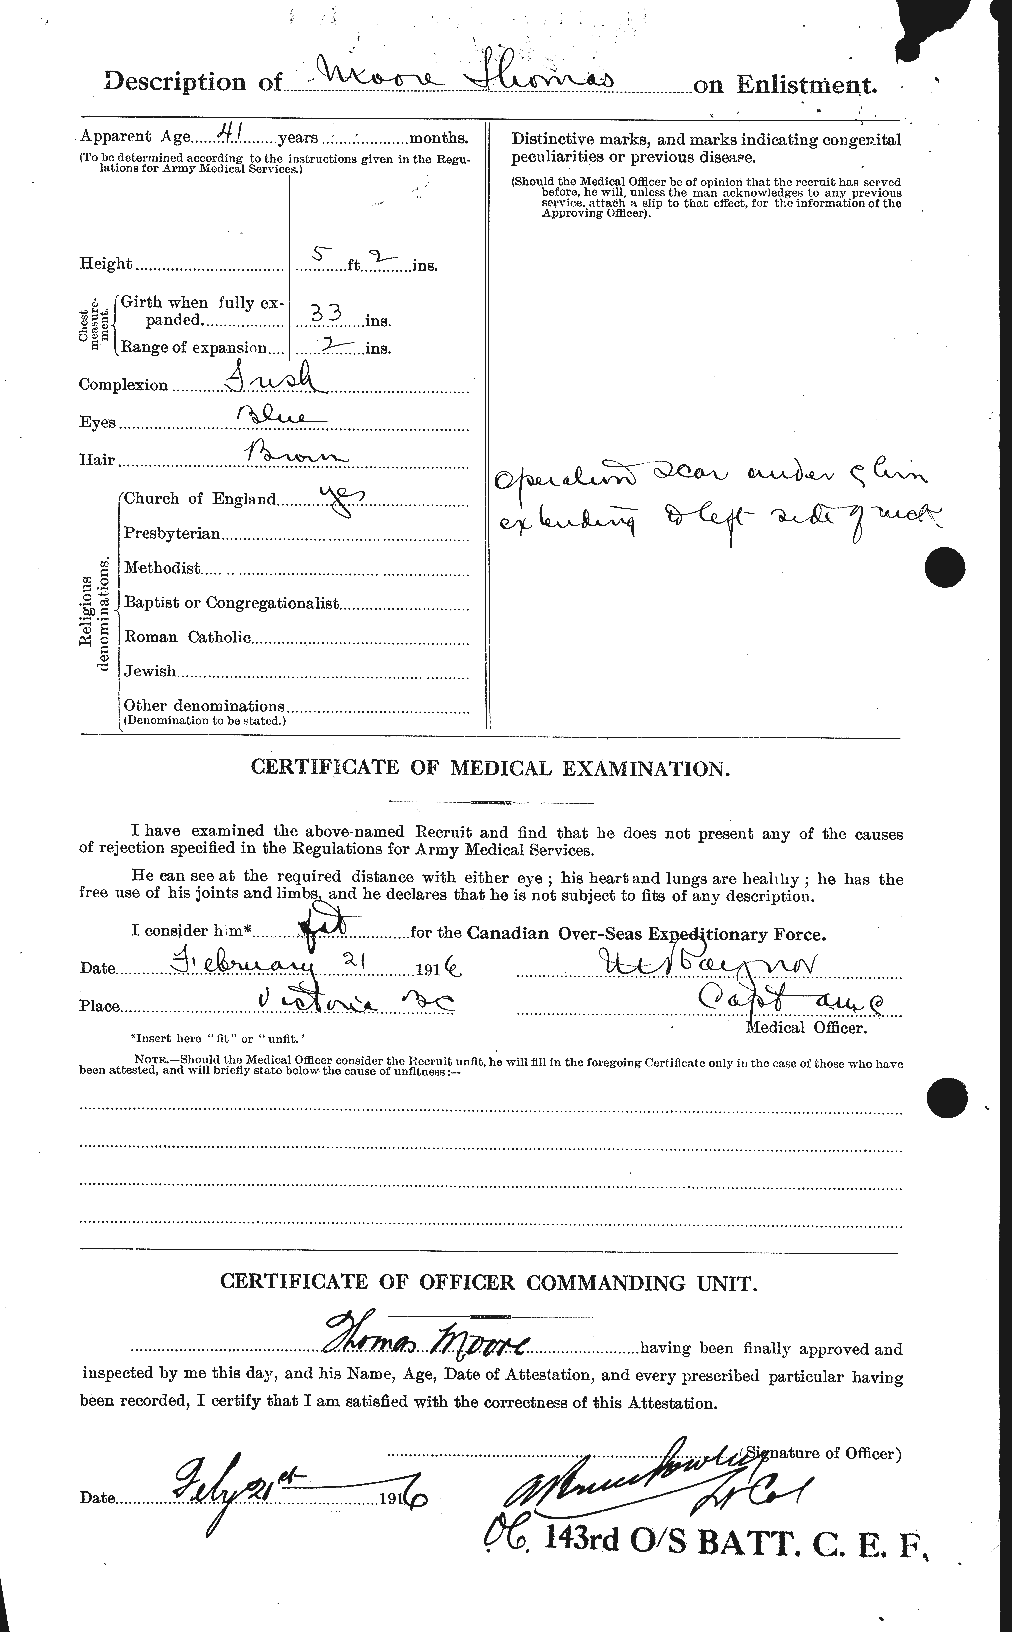 Personnel Records of the First World War - CEF 505611b